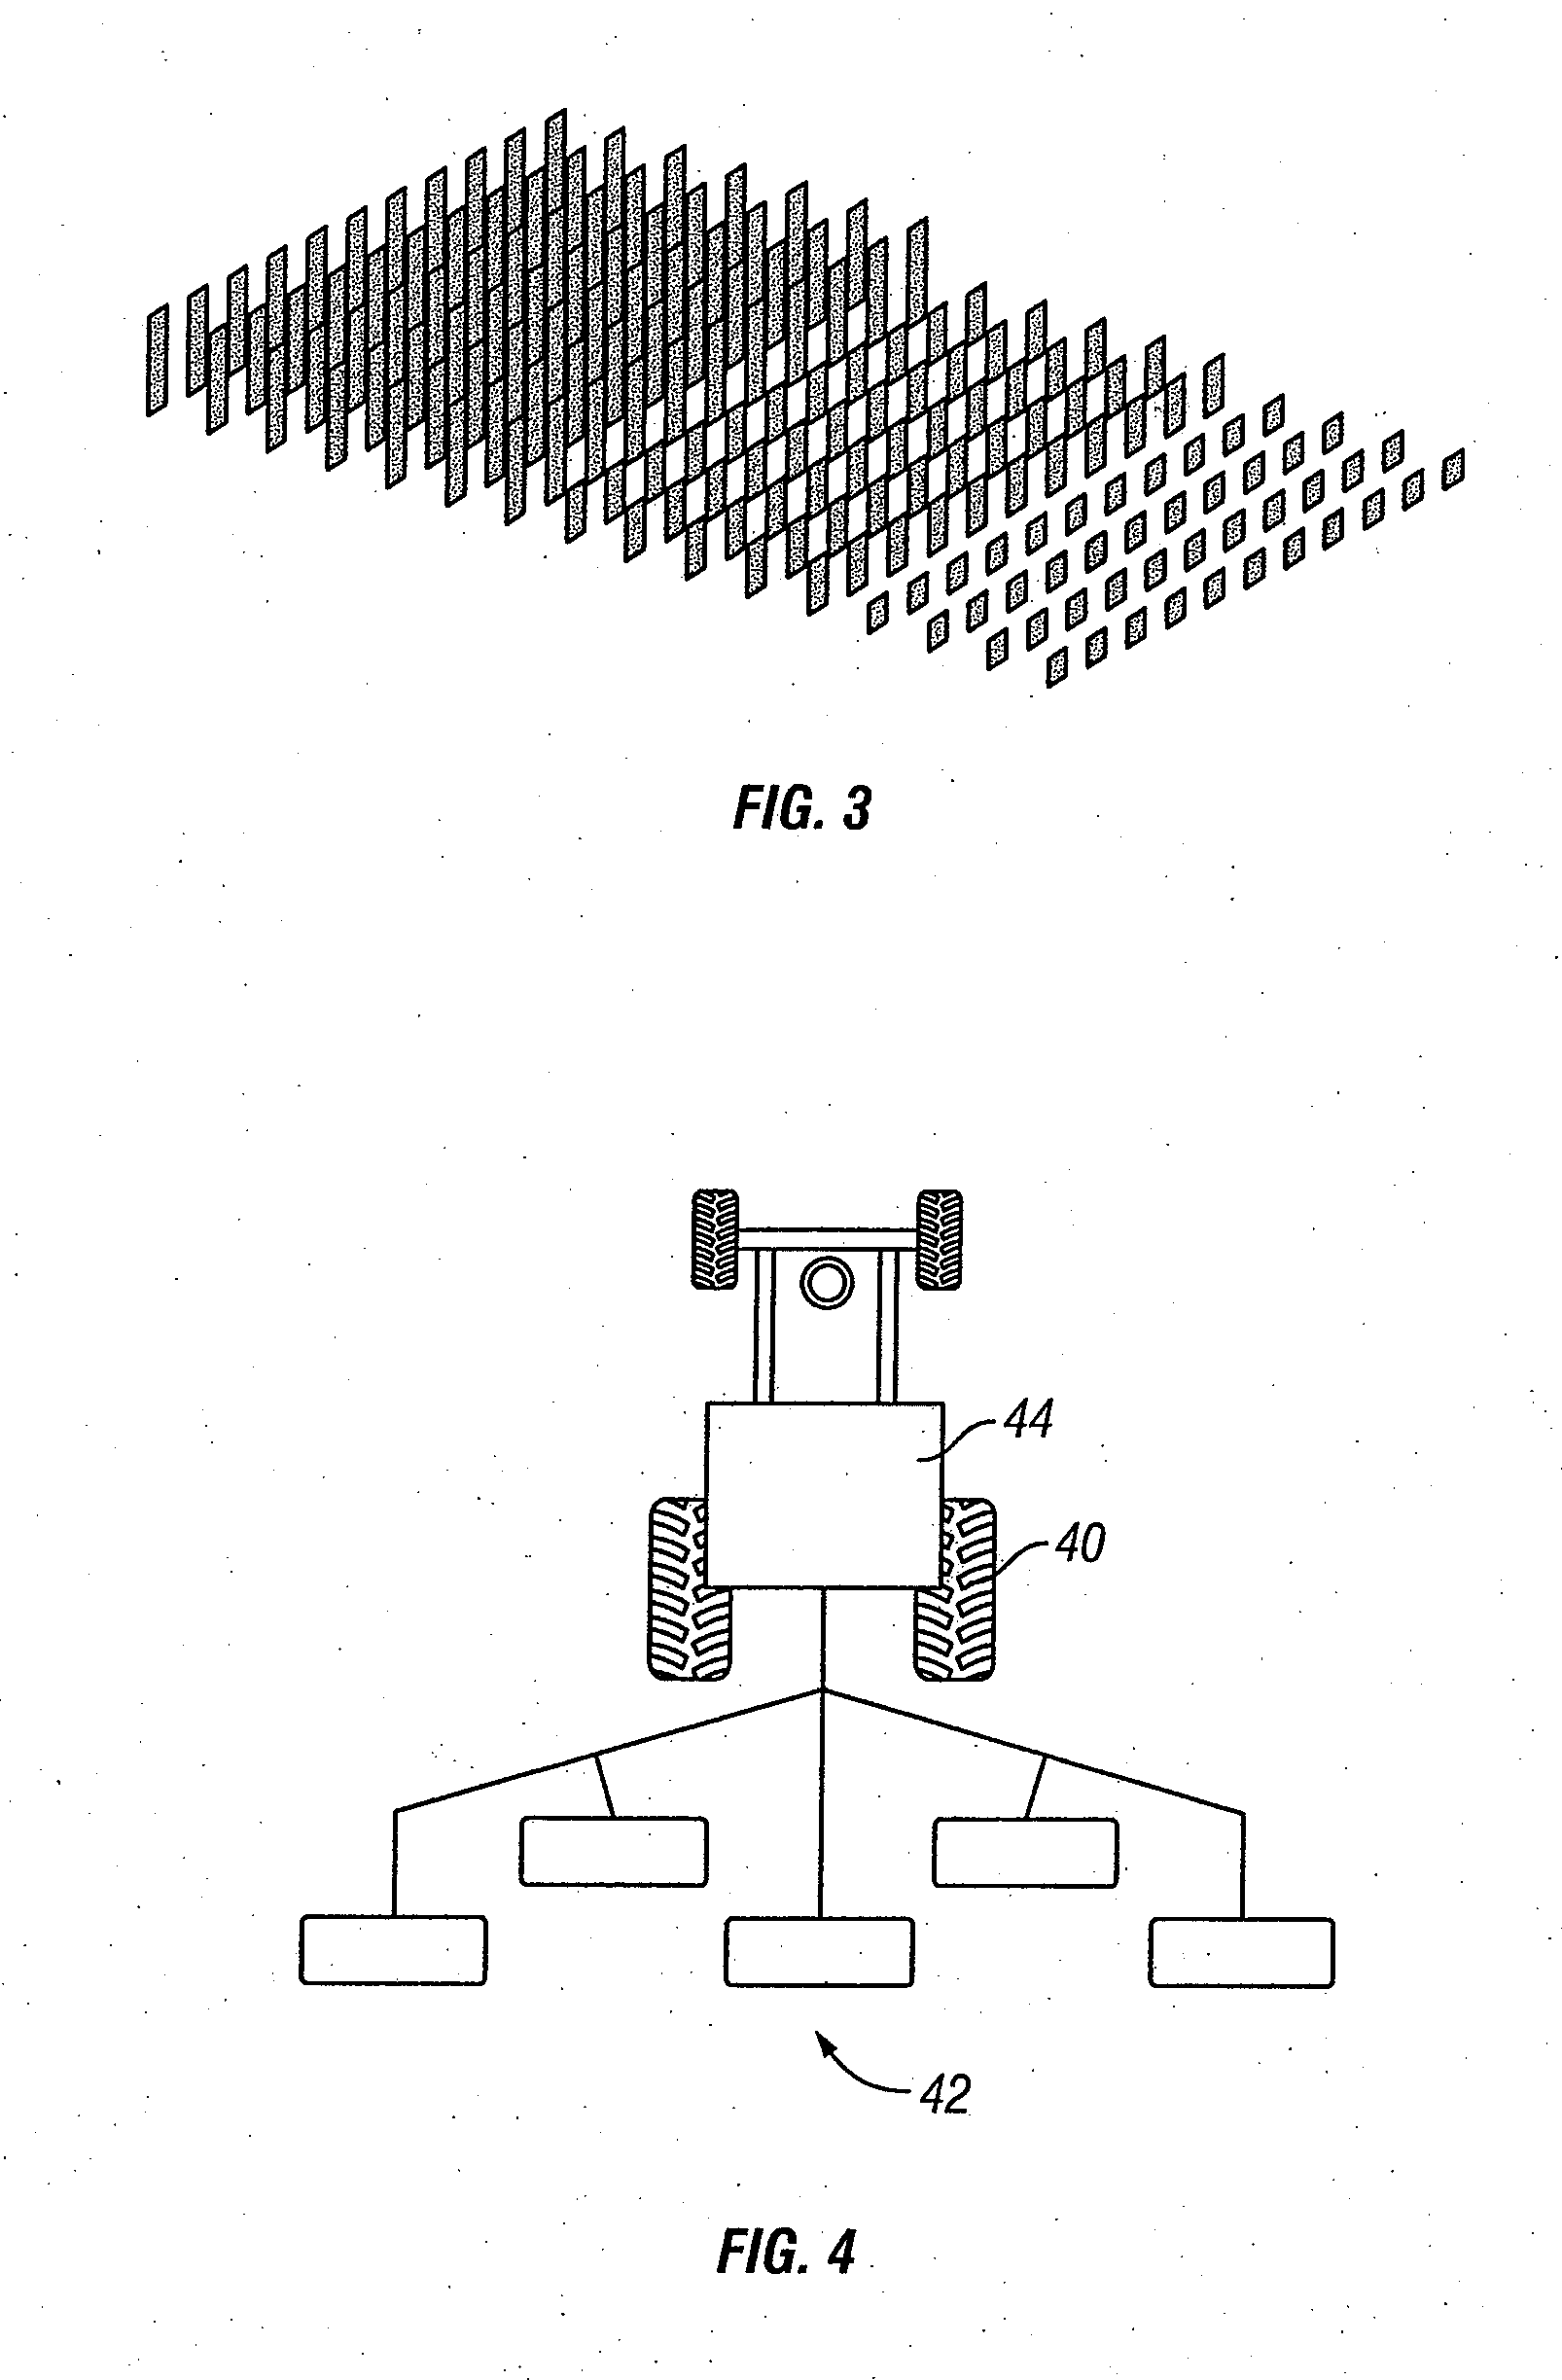 Method and Apparatus for Creating Visual Effects on Grass